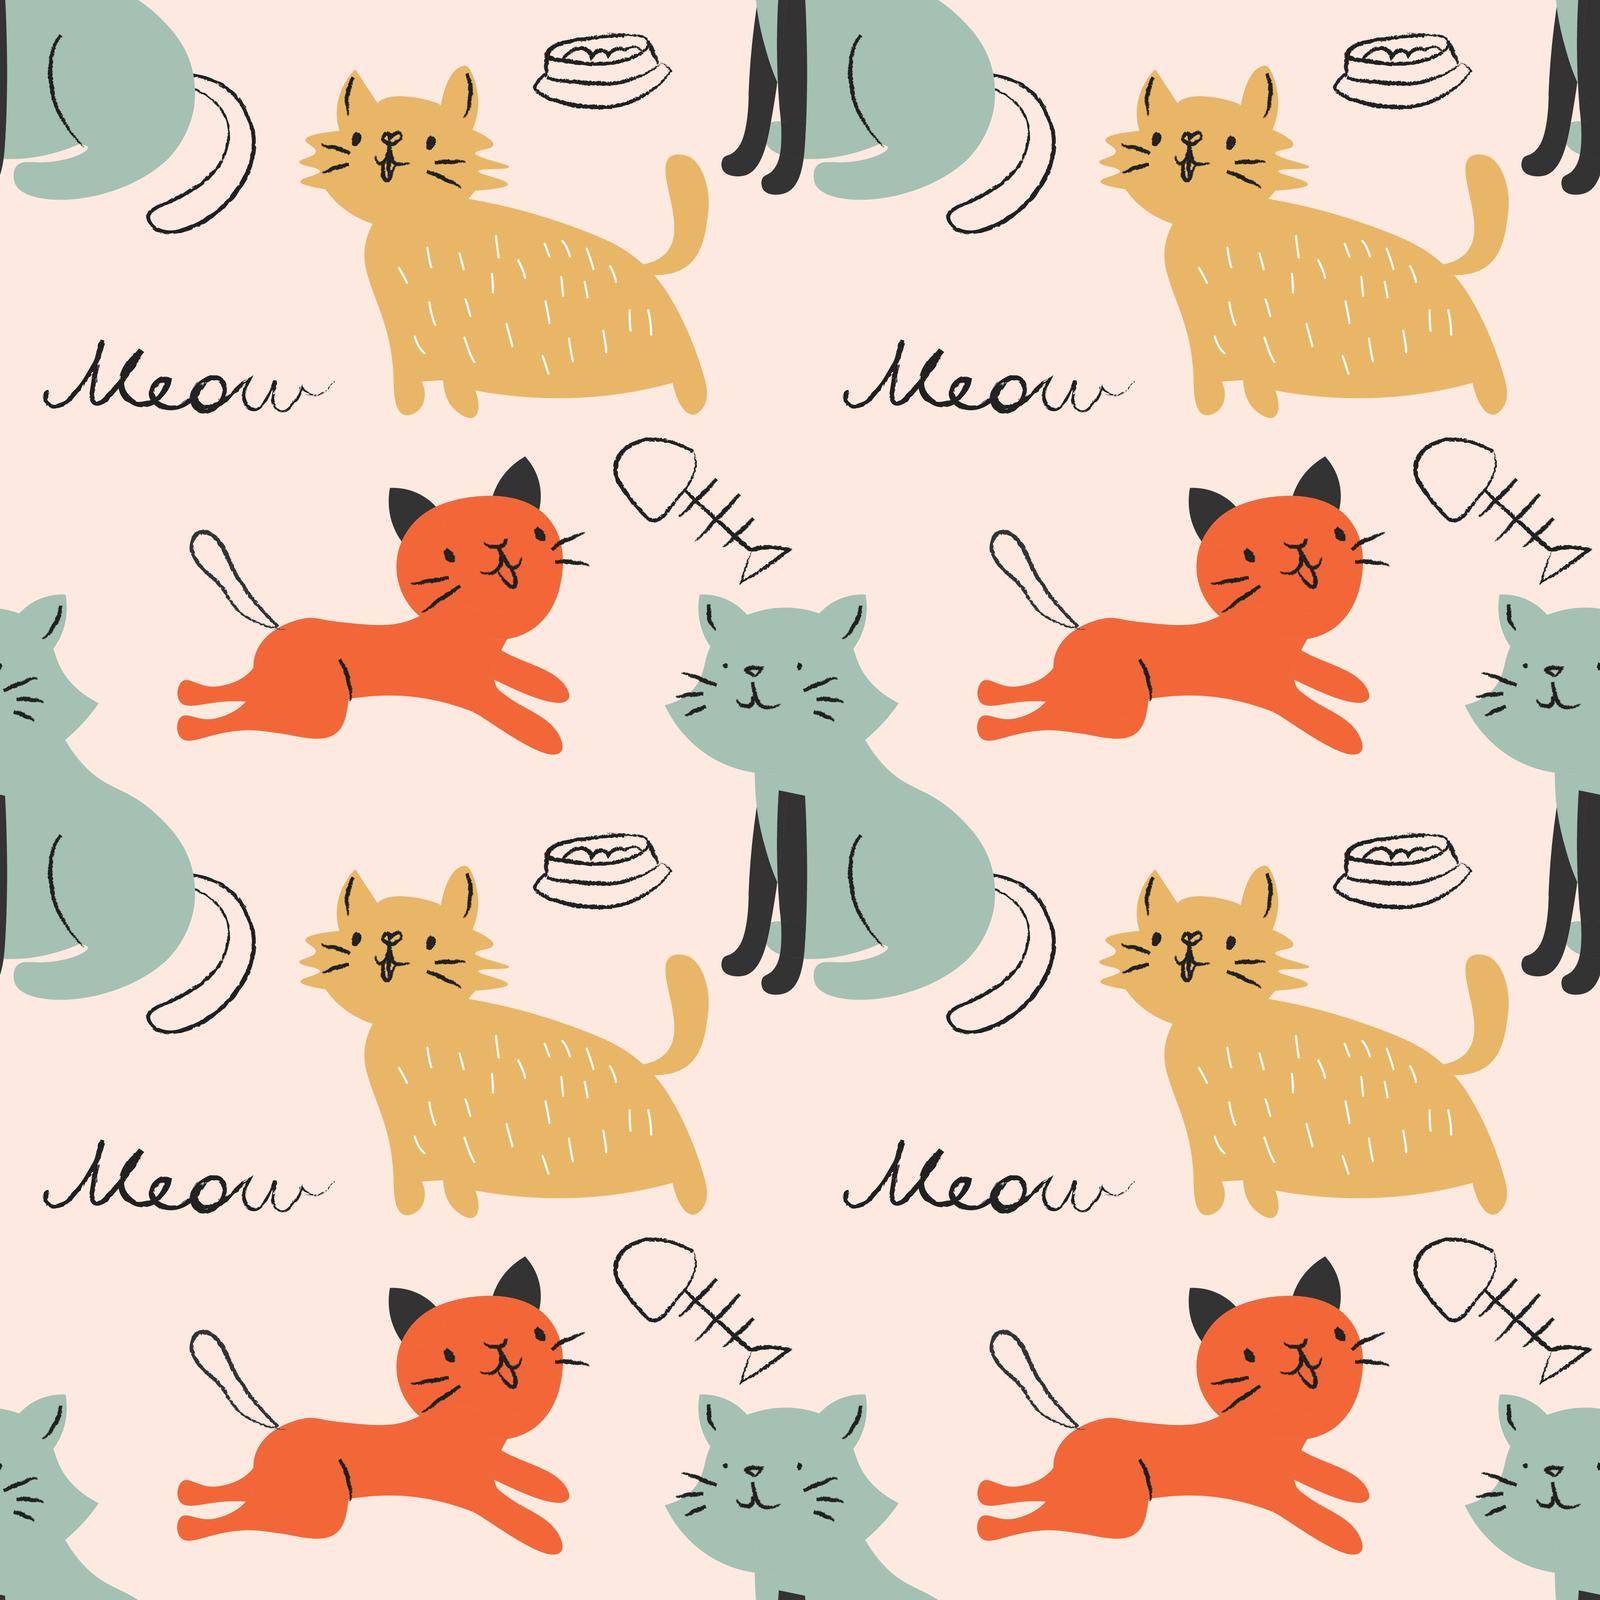 Seamless pattern with funny cats, cat food and fish on a pink background. Vector illustration.